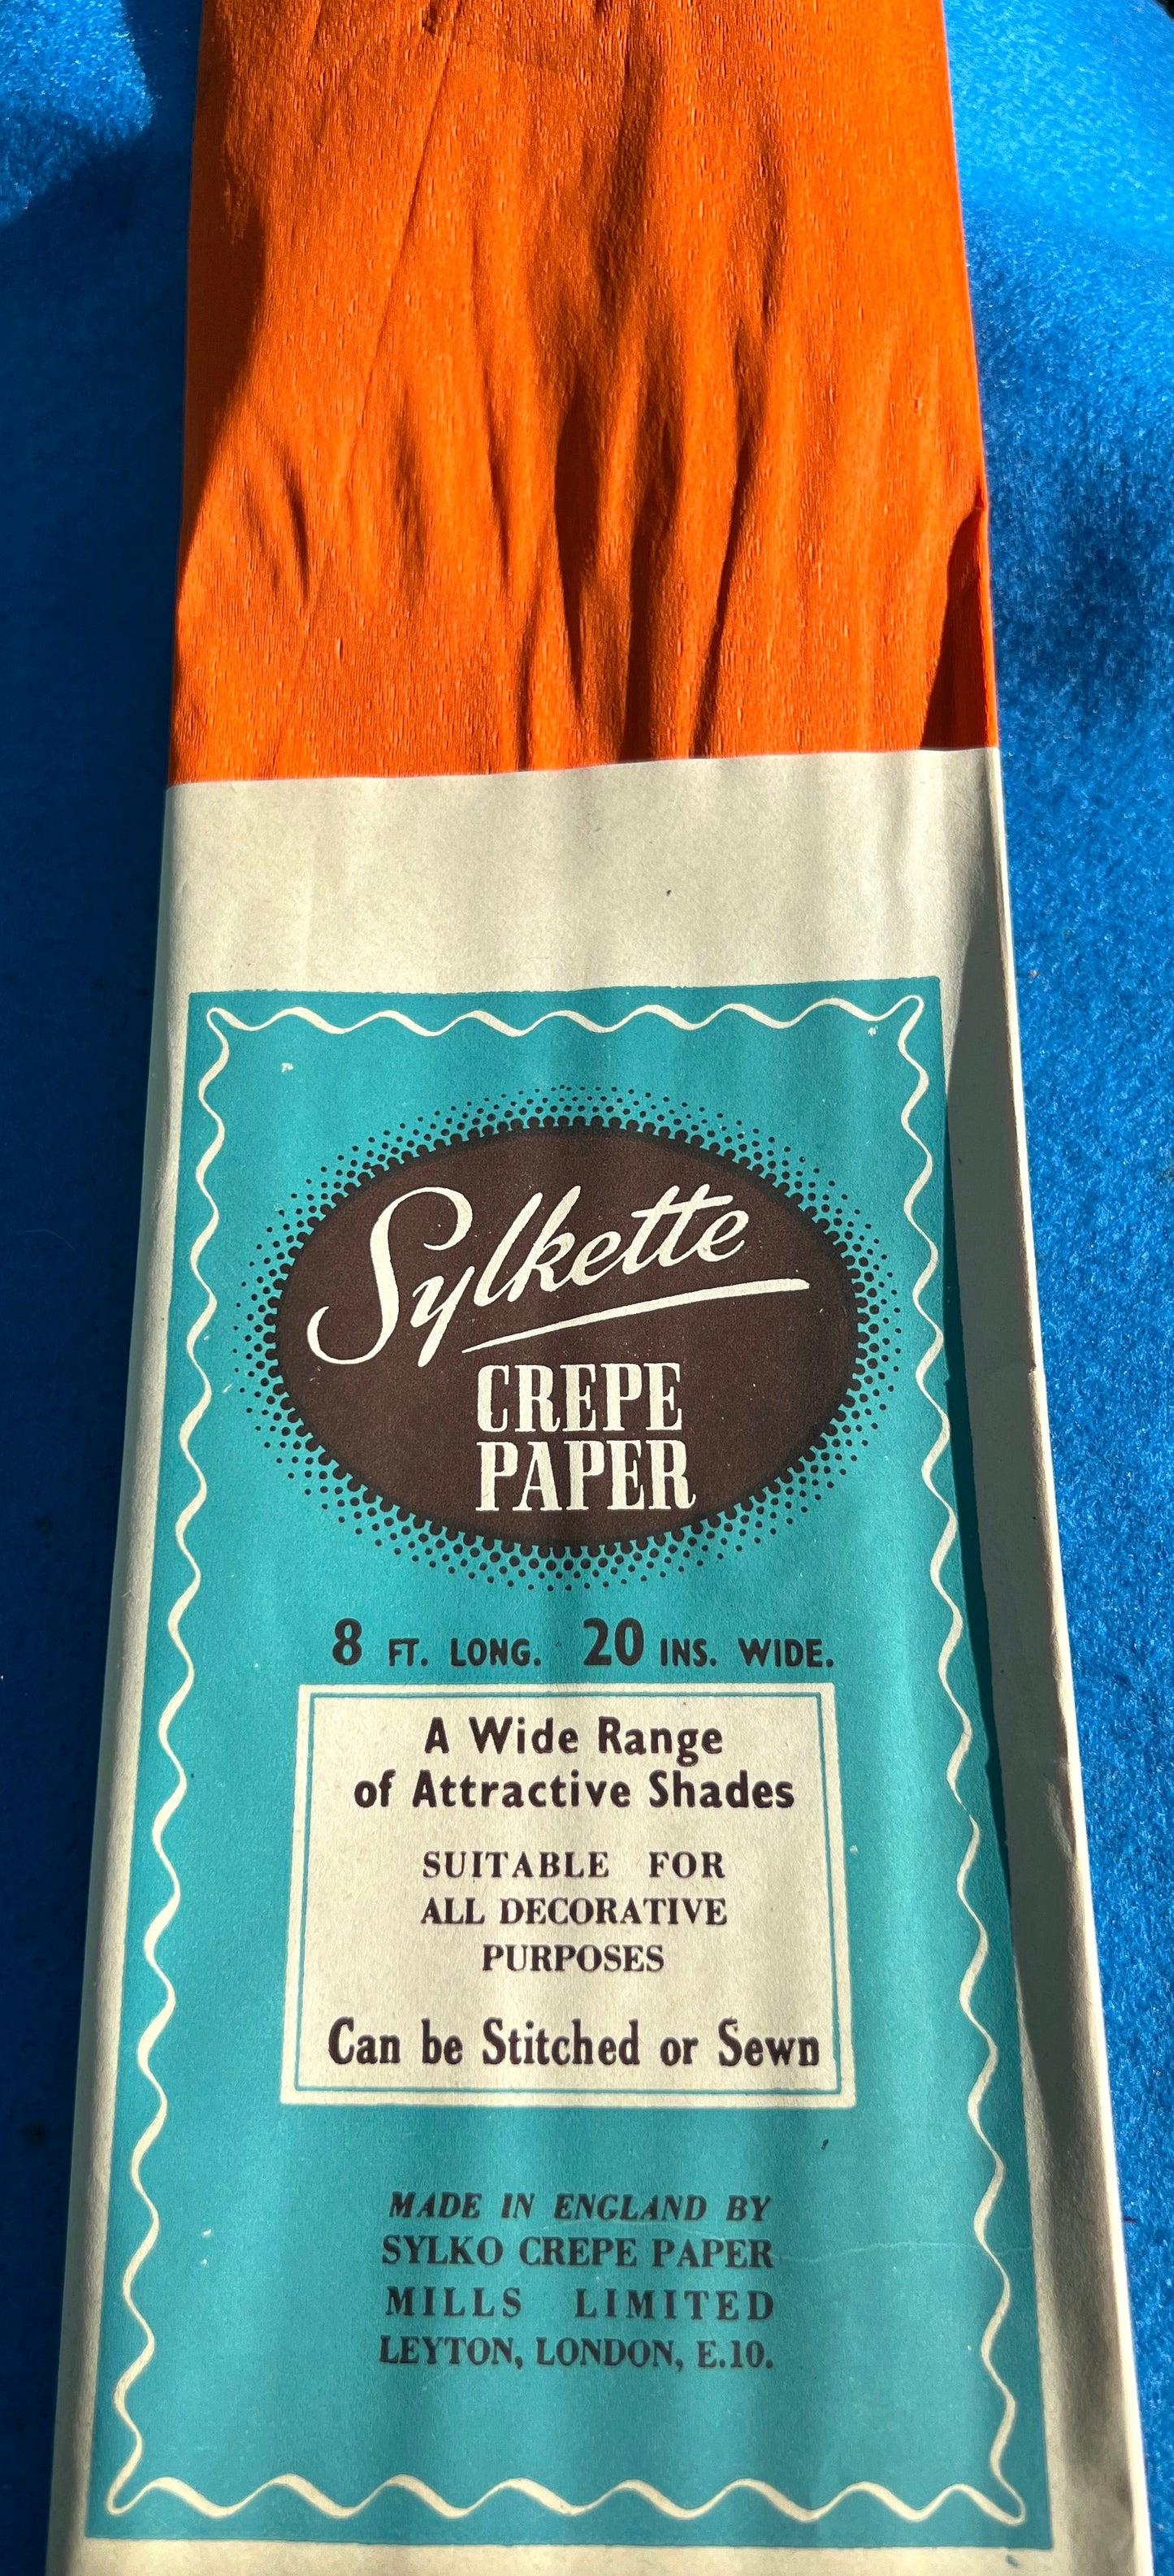 8 ft Vintage Crepe Paper 20" wide "SUITABLE FOR ALL DECORATIVE PURPOSES"